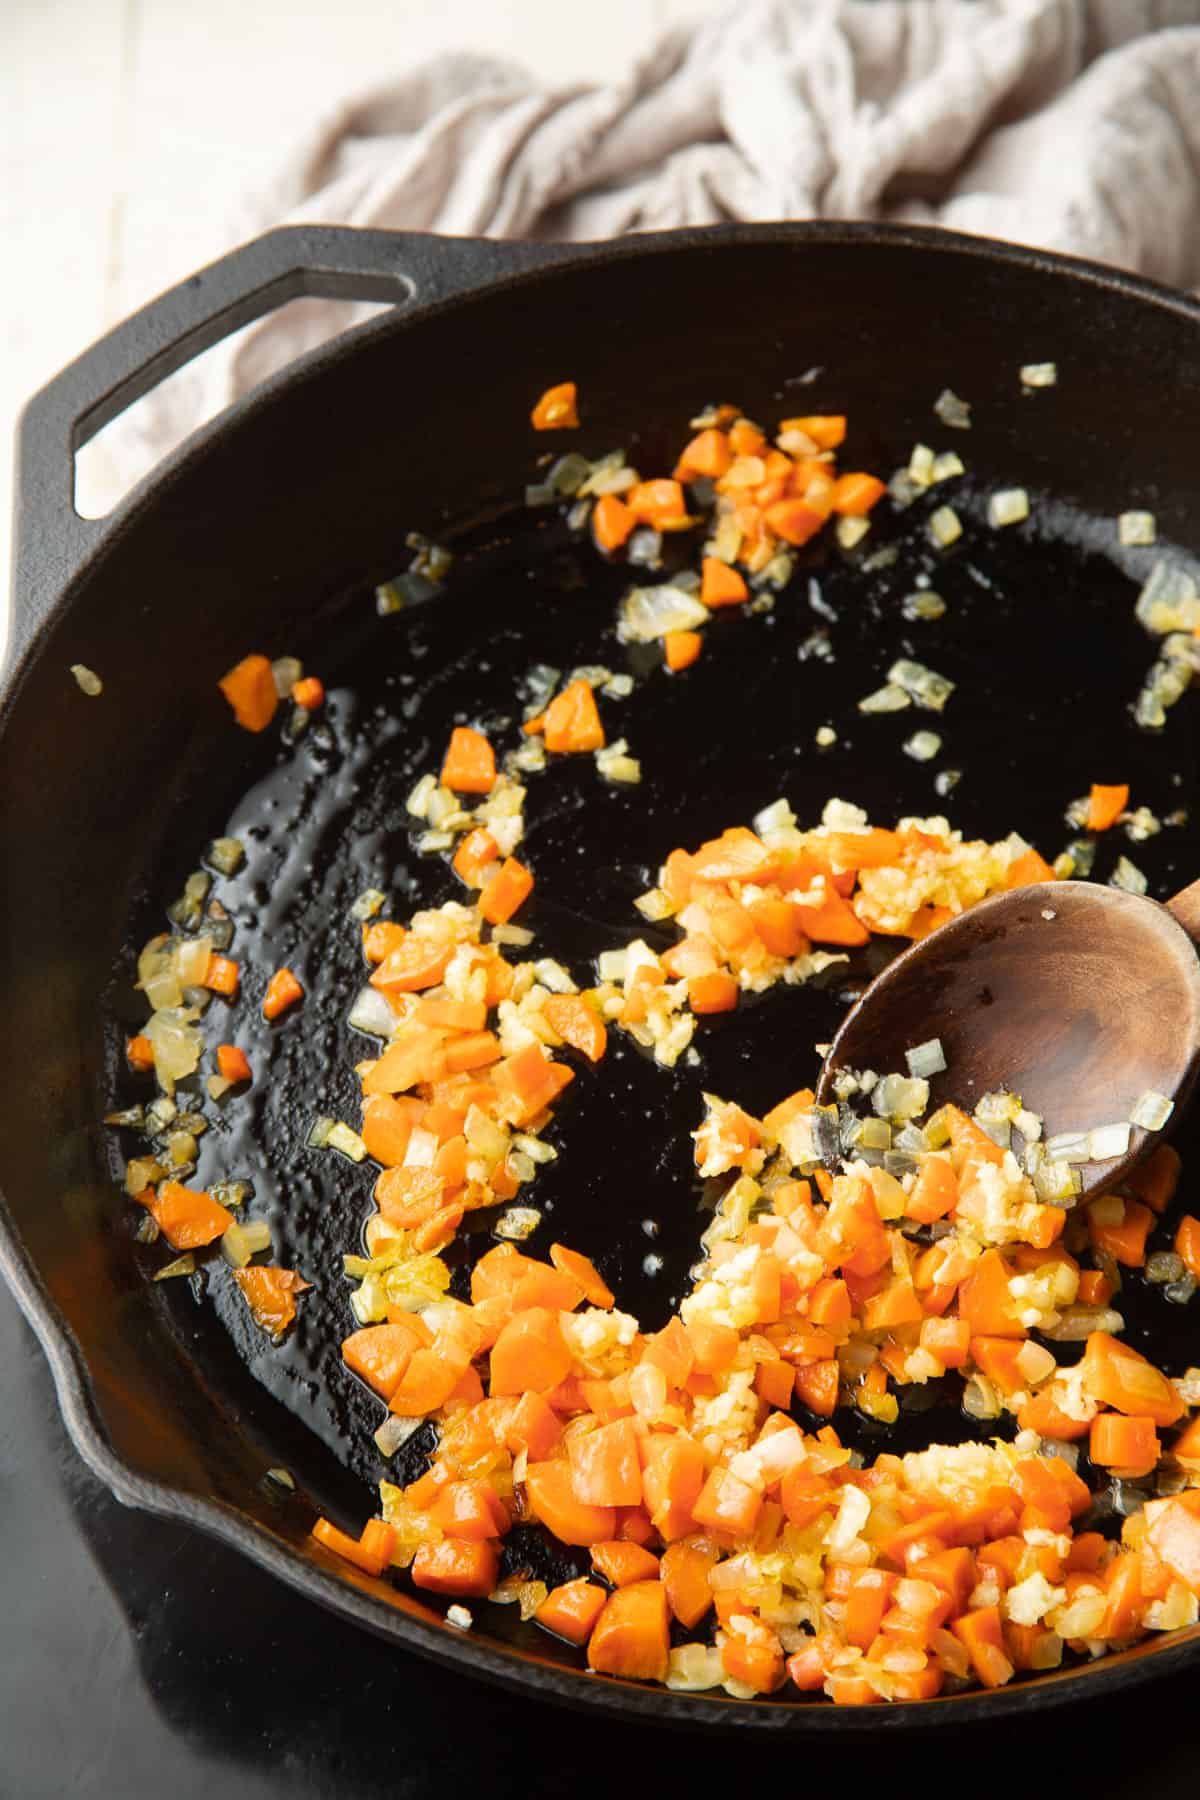 Carrots, onions, and garlic cooking in a skillet.